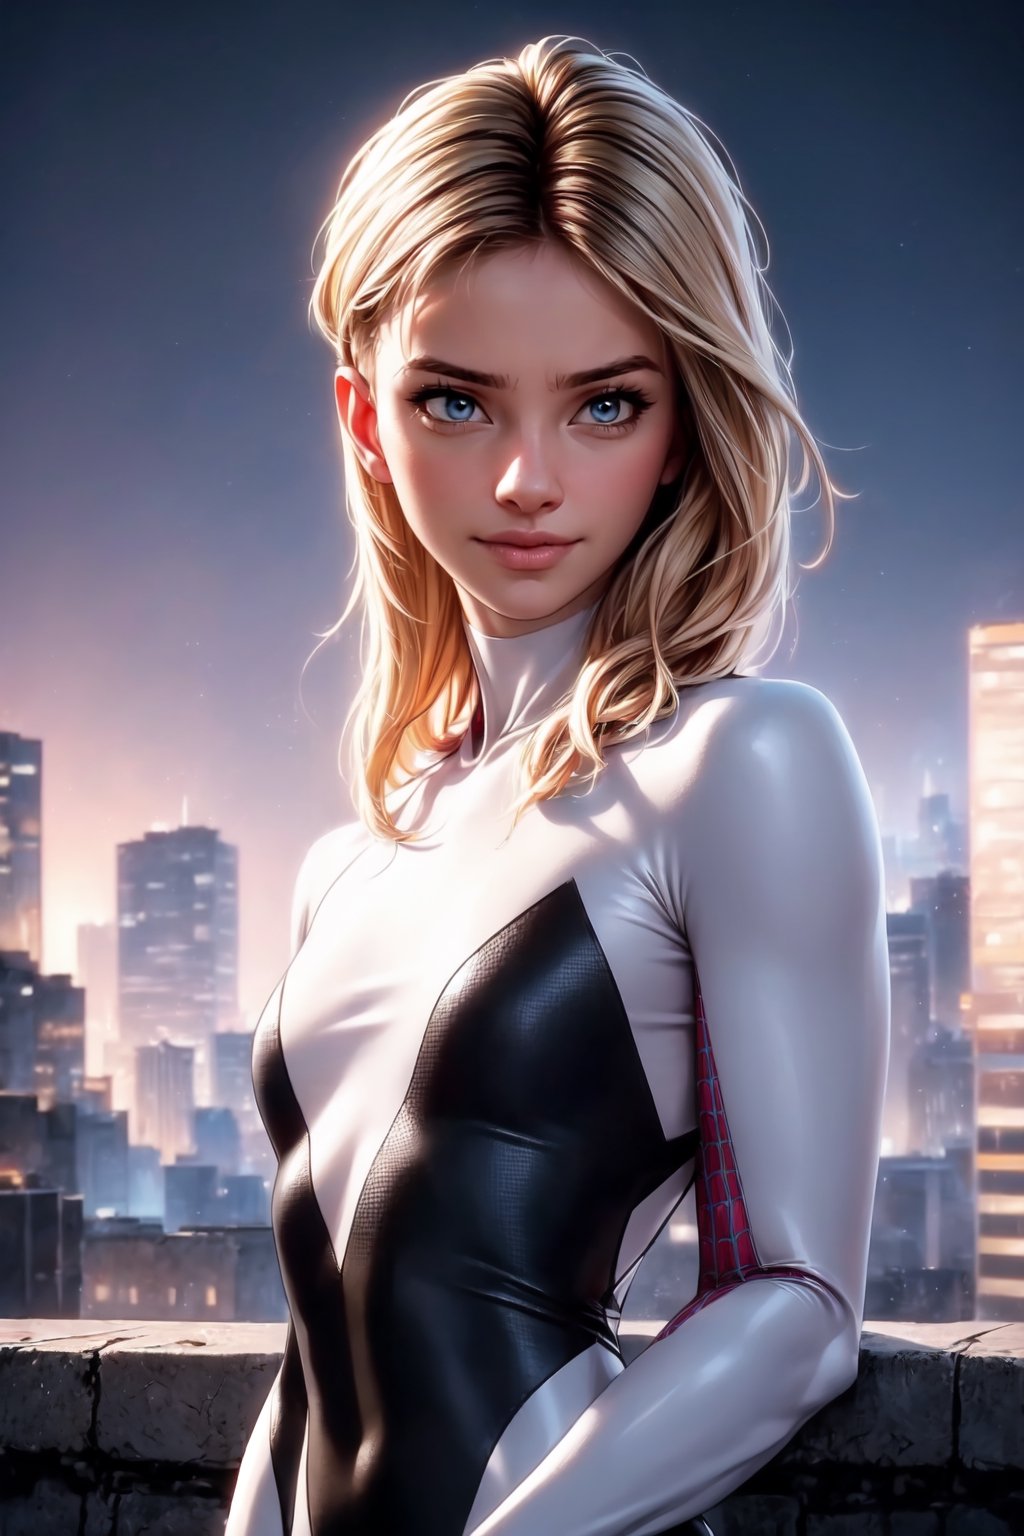 (Alone:1.5), (Solo:1.5), ((Medium full shot:1.5)), realistic, masterpiece,best quality,High definition, (realistic lighting, sharp focus), high resolution,volumetric light, outdoors, dynamic pose, BREAK, a 25 years old woman
on top of a building during a starry night, spidergirl, hair movement, blond_hair, blue_eyes, focus face,  looking away, Smile,gwen, city light, medium breats,